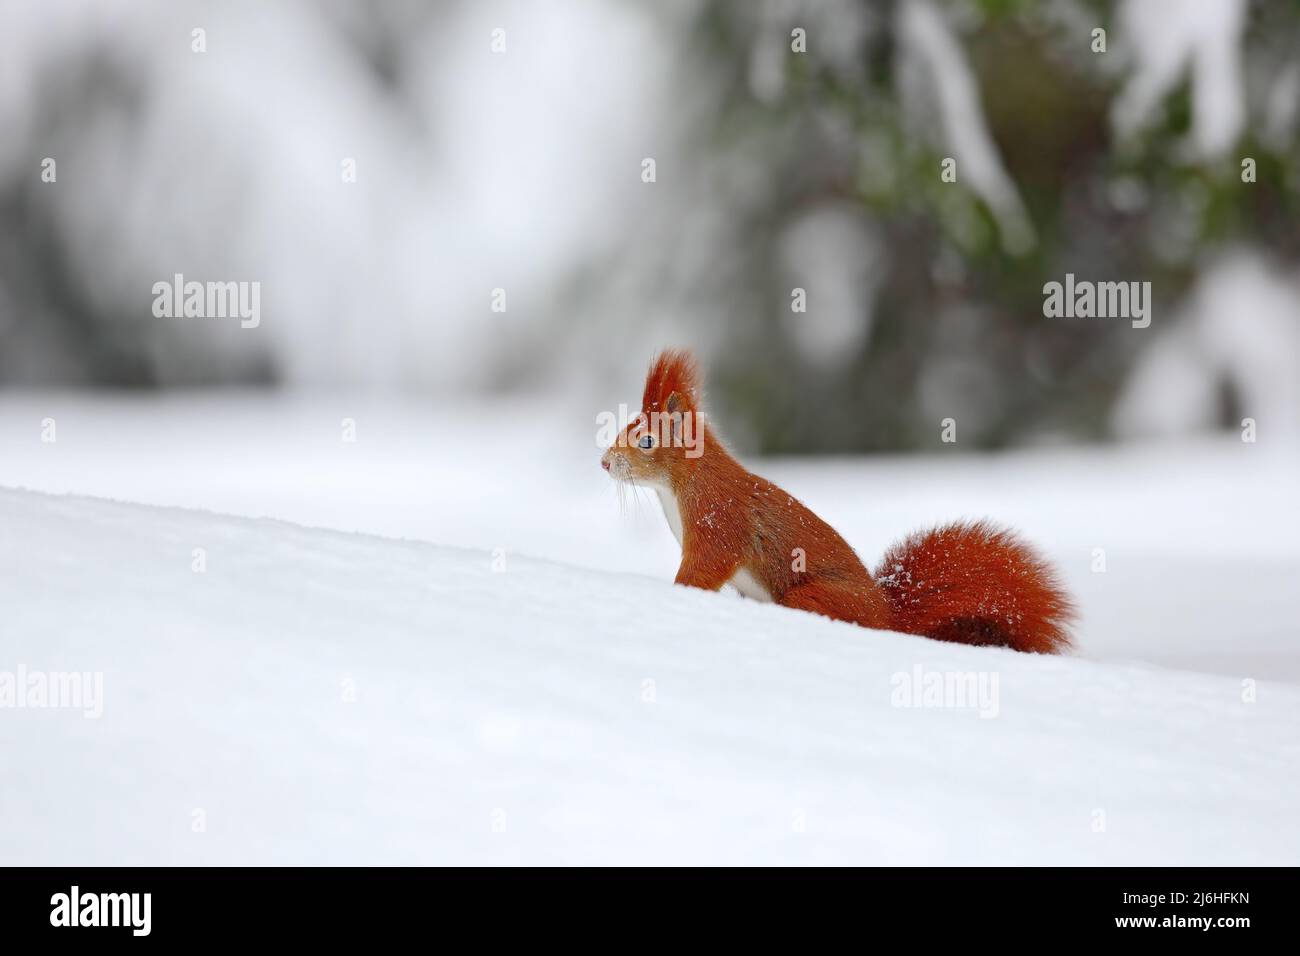 Squirrel, cute red animal in winter scene with snow blurred forest in the background, France Stock Photo